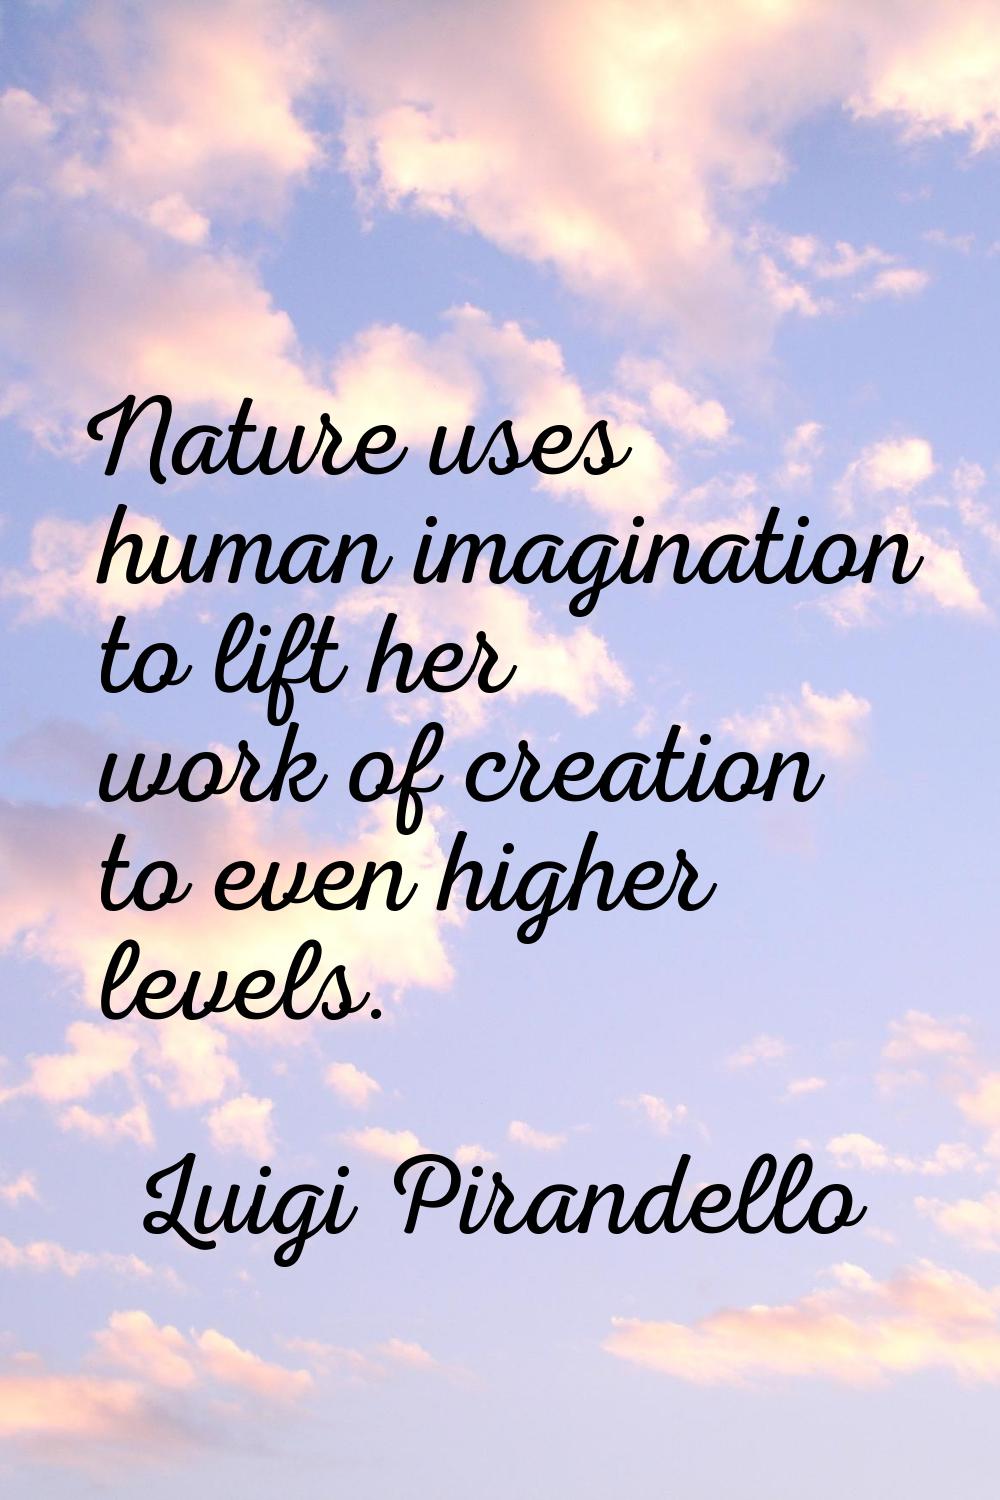 Nature uses human imagination to lift her work of creation to even higher levels.